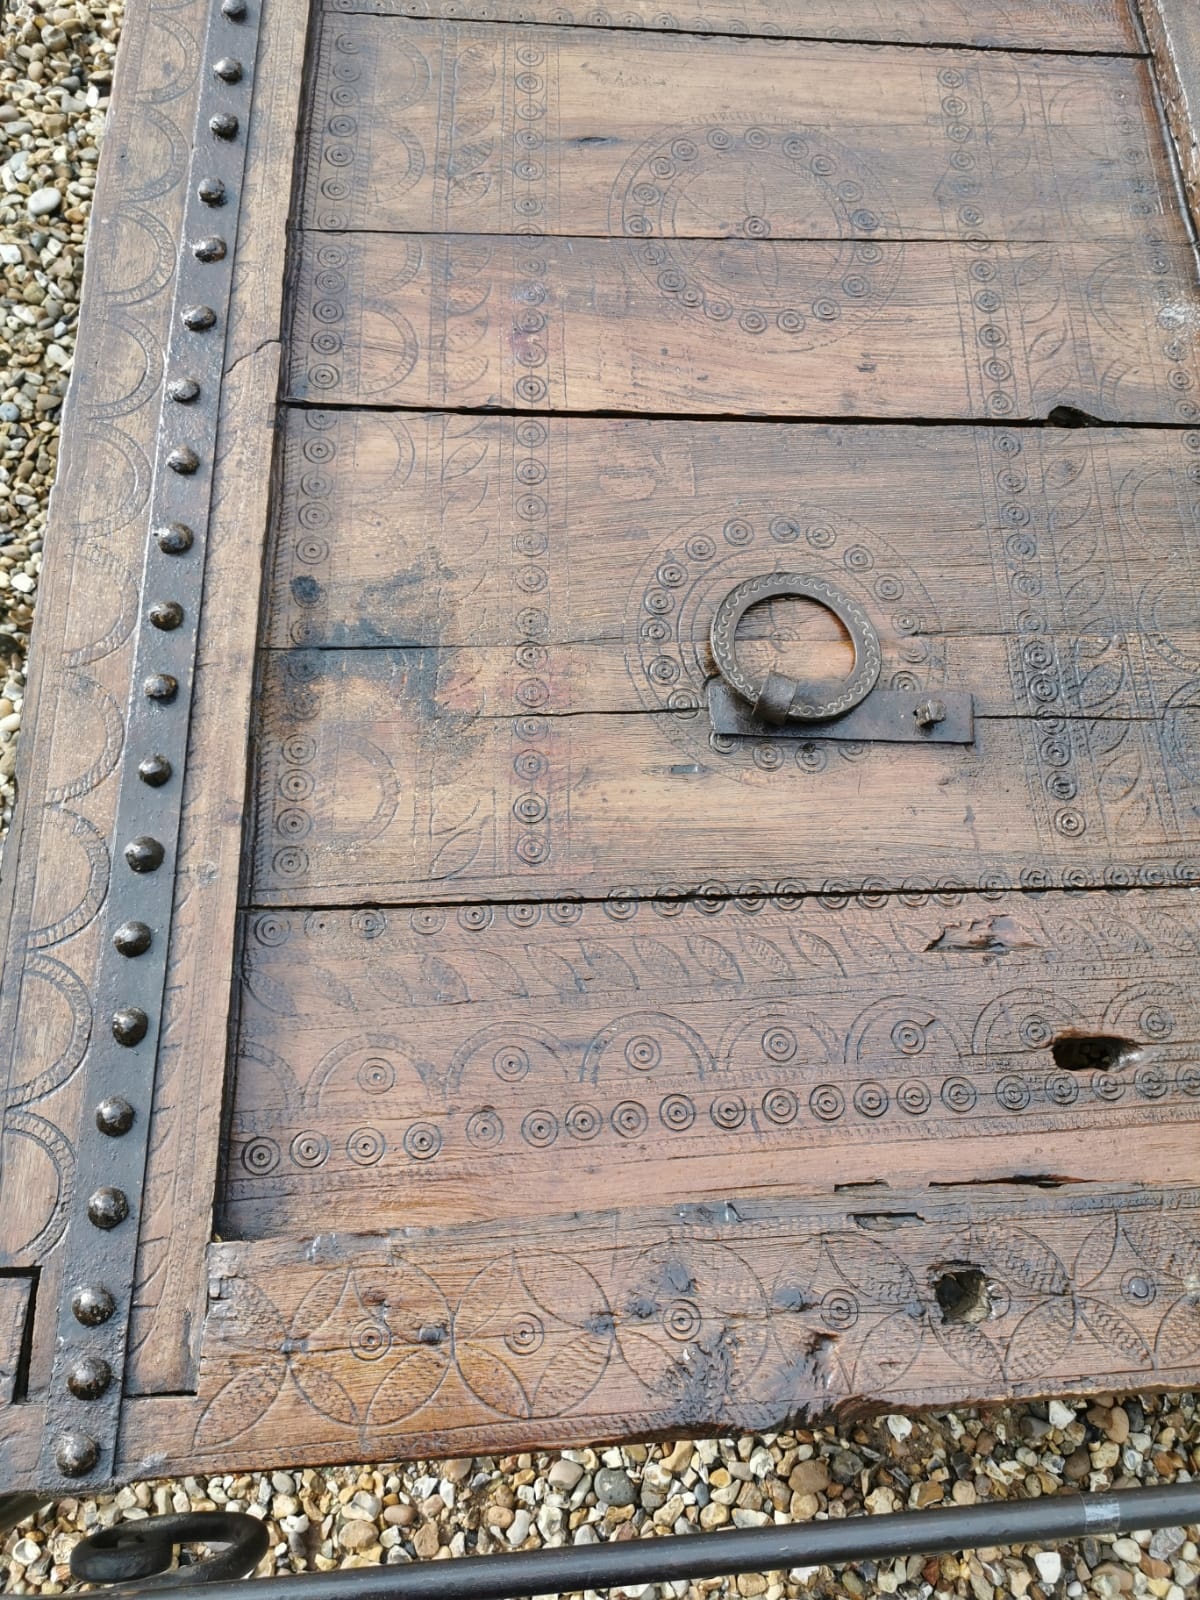 A LARGE 18TH/19TH CENTURY HARDWOOD DOOR With lightly carved decoration and heavy iron strap work, - Image 3 of 3